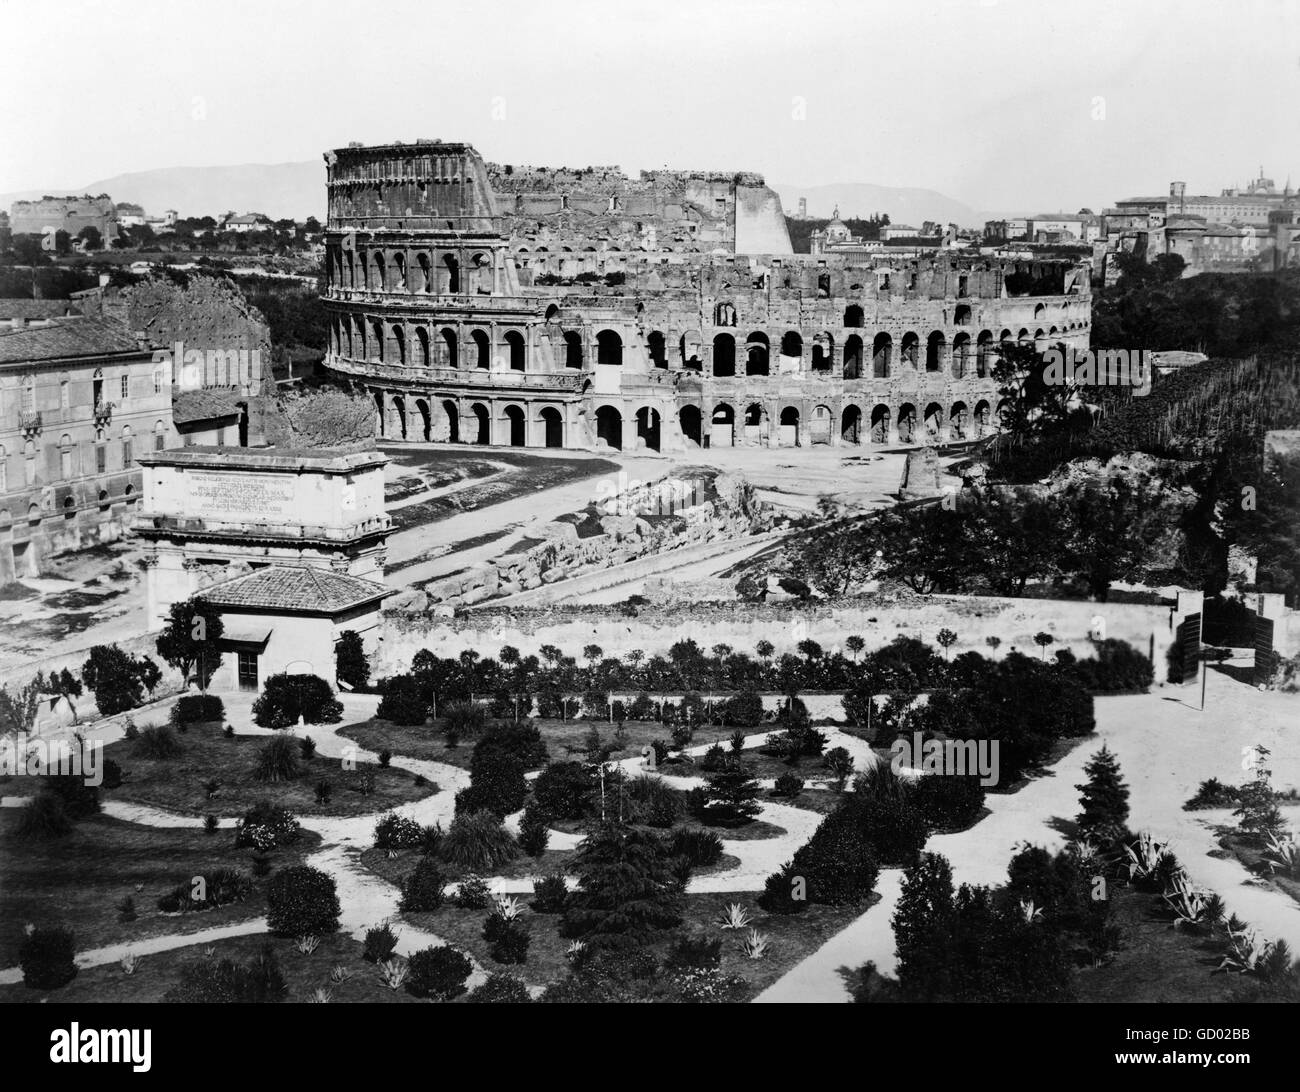 Colosseum, Rome. 19th century view of the Colosseum in Rome. Photo taken between 1860 and 1890 Stock Photo